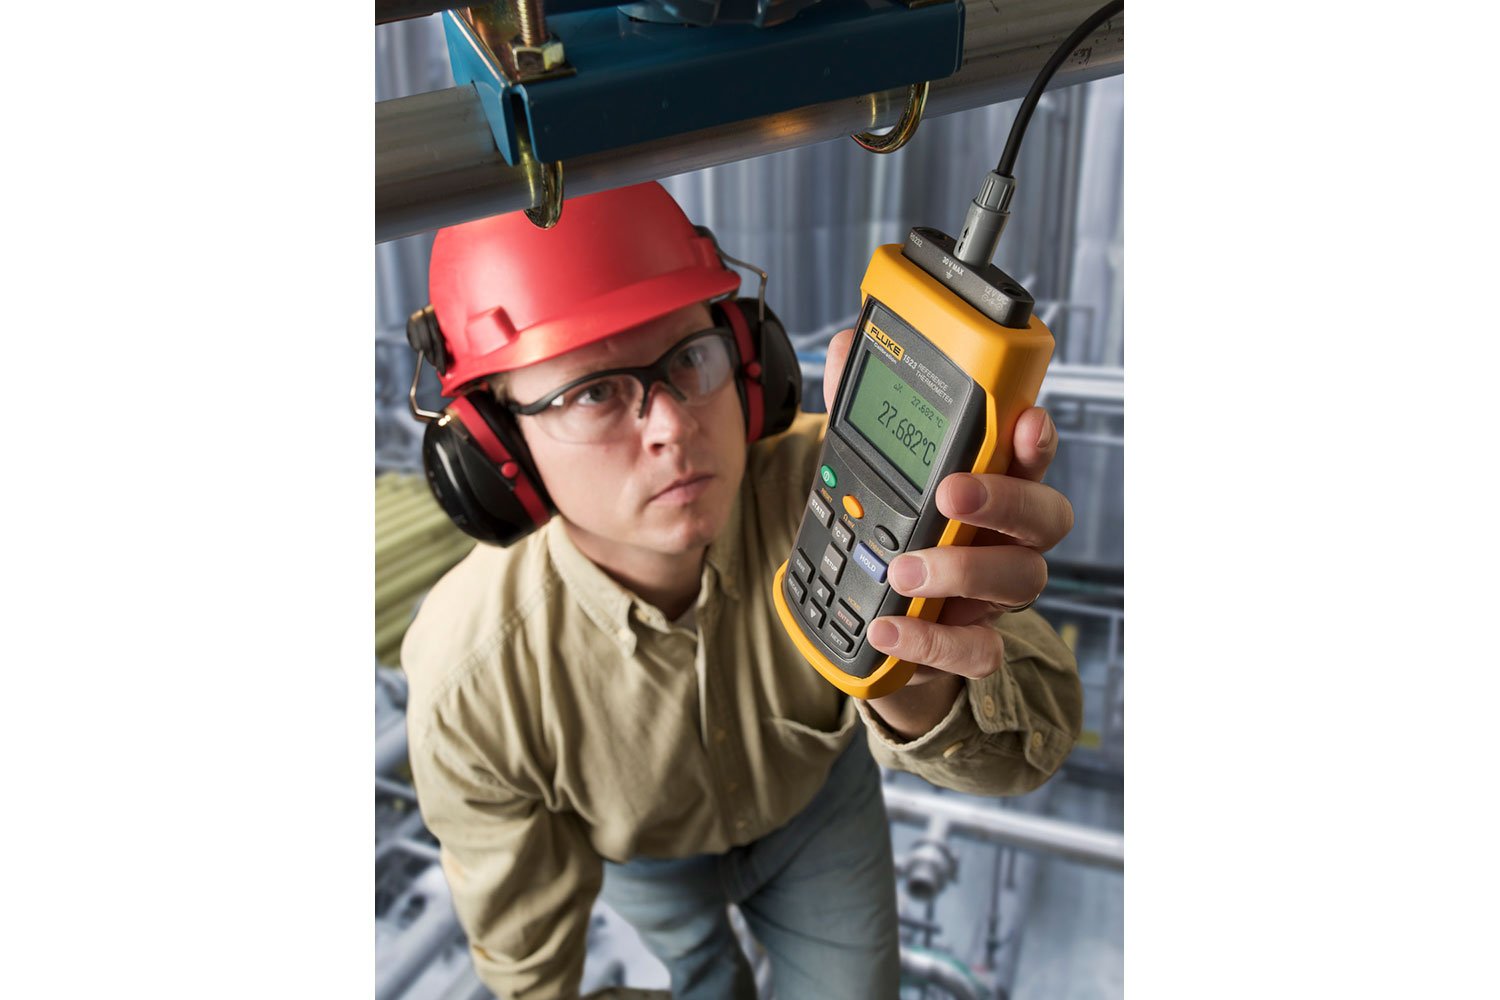 Fluke Calibration 1523 Reference Thermometer used in an industrial application.